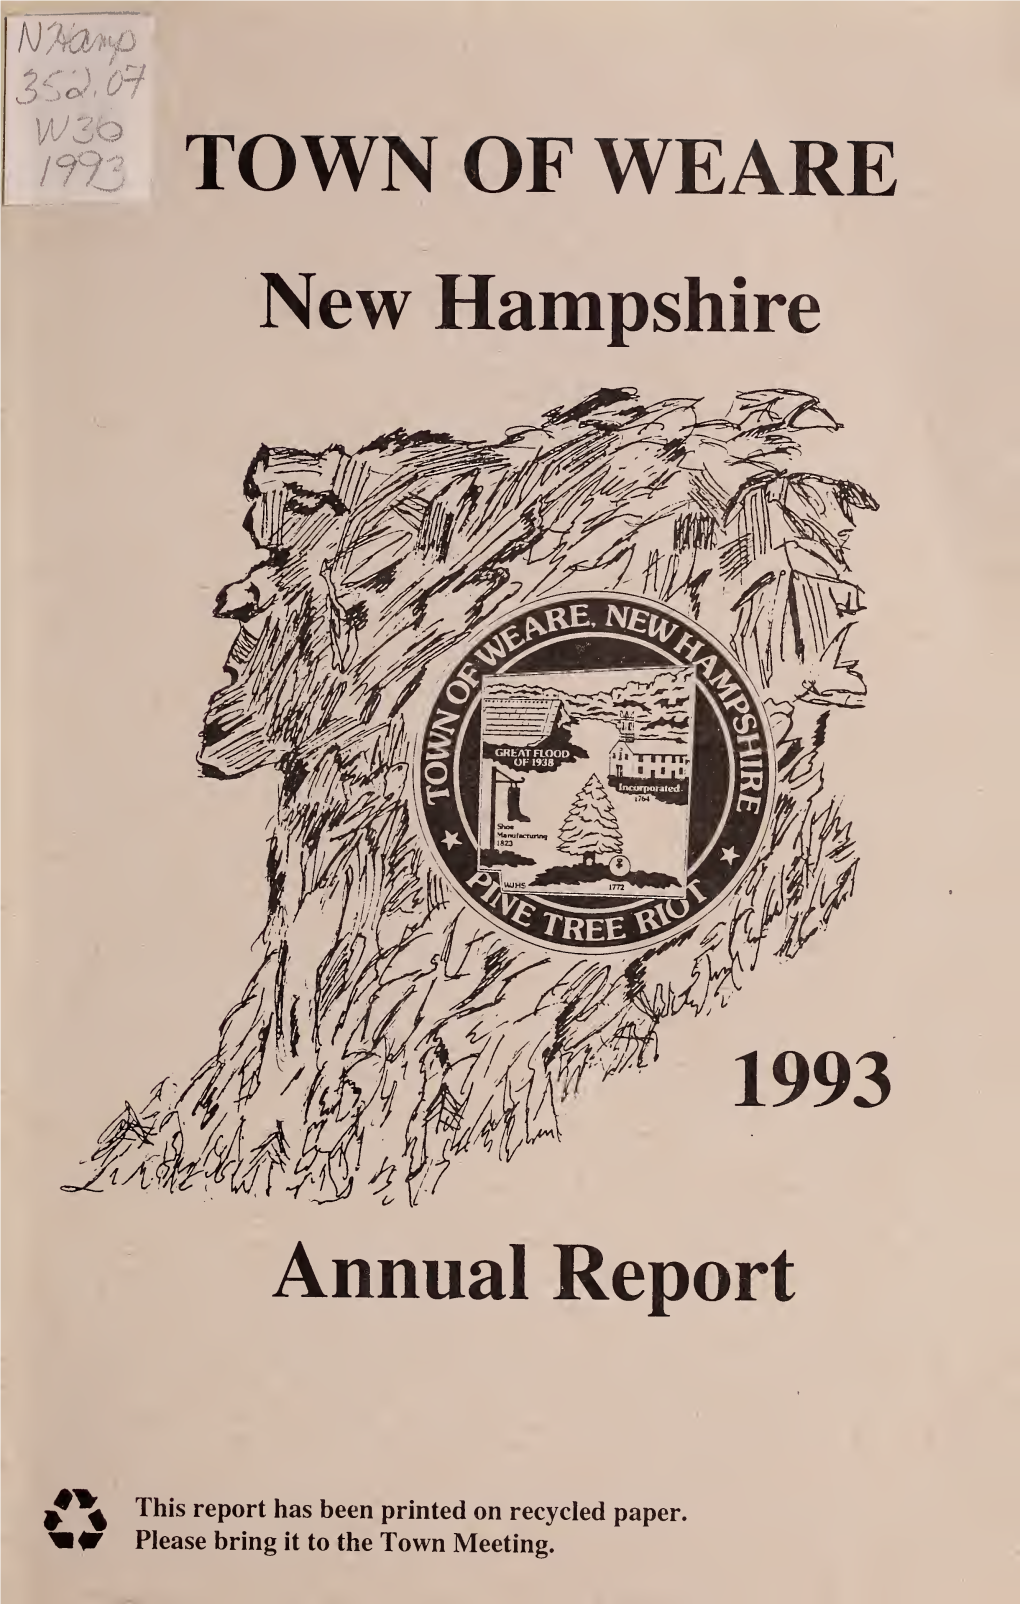 Annual Report of the Town of Weare, New Hampshire